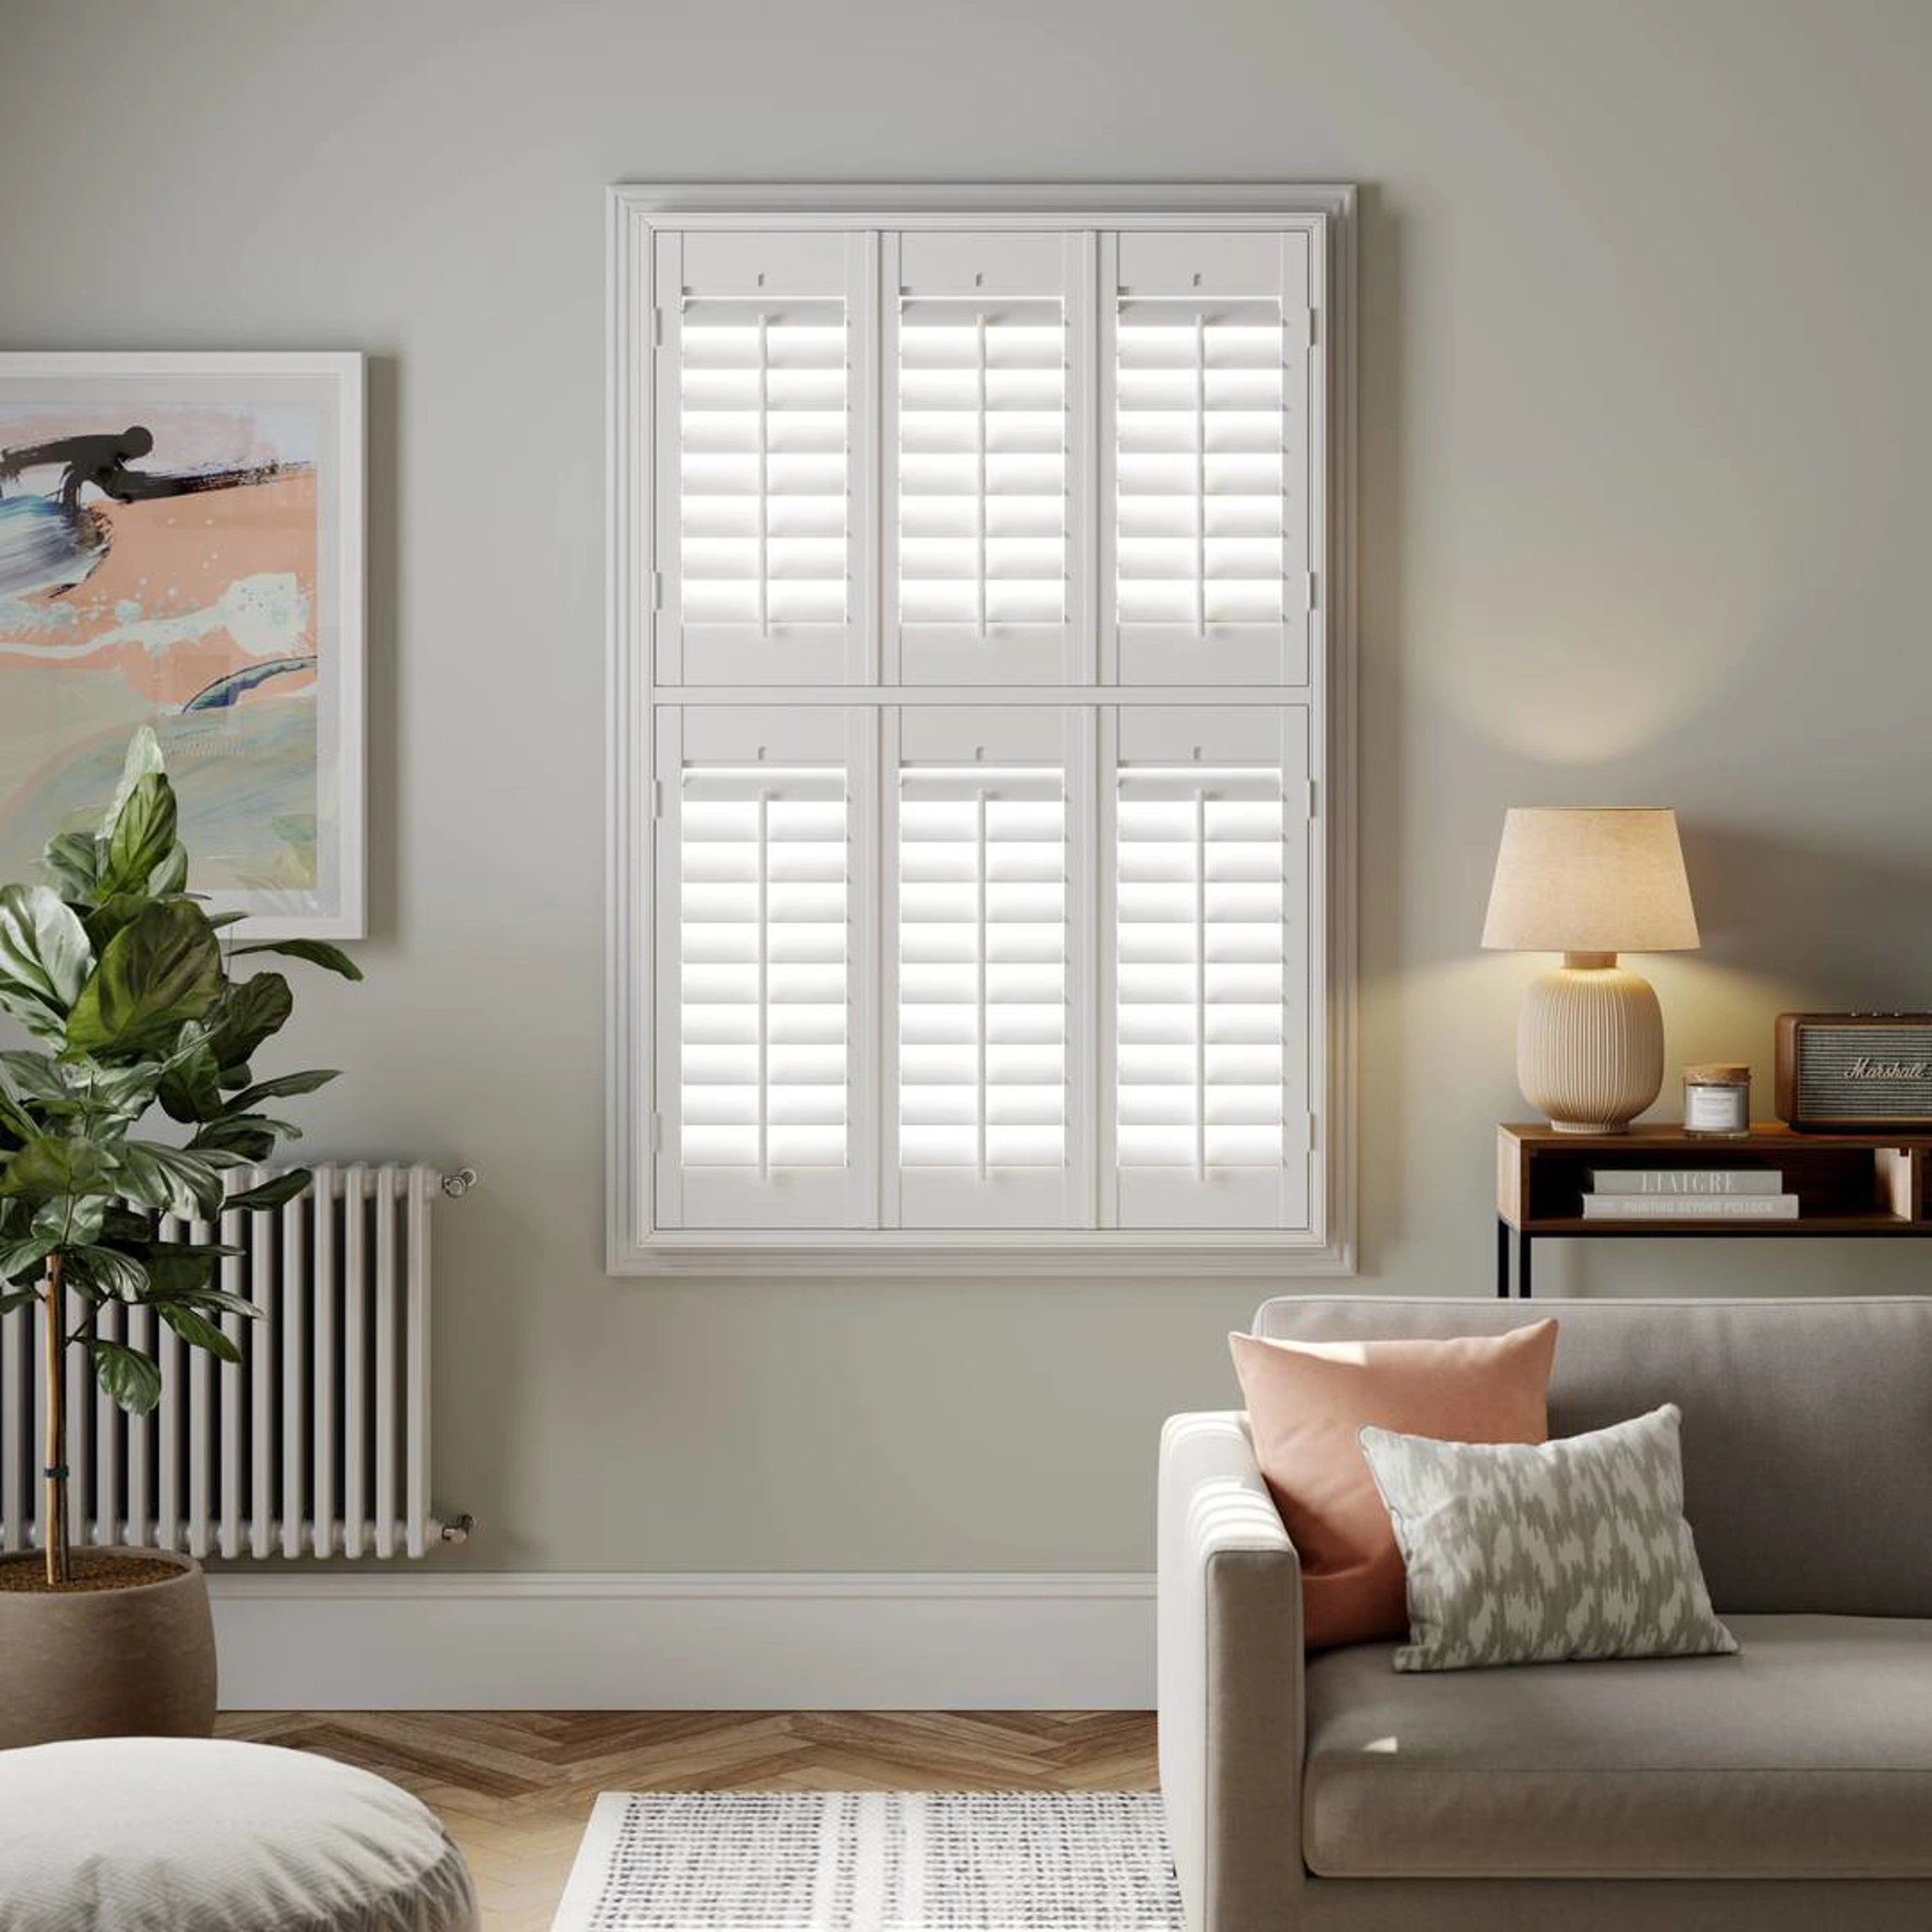 Vivid White wooden shutters on sash window wall in living room